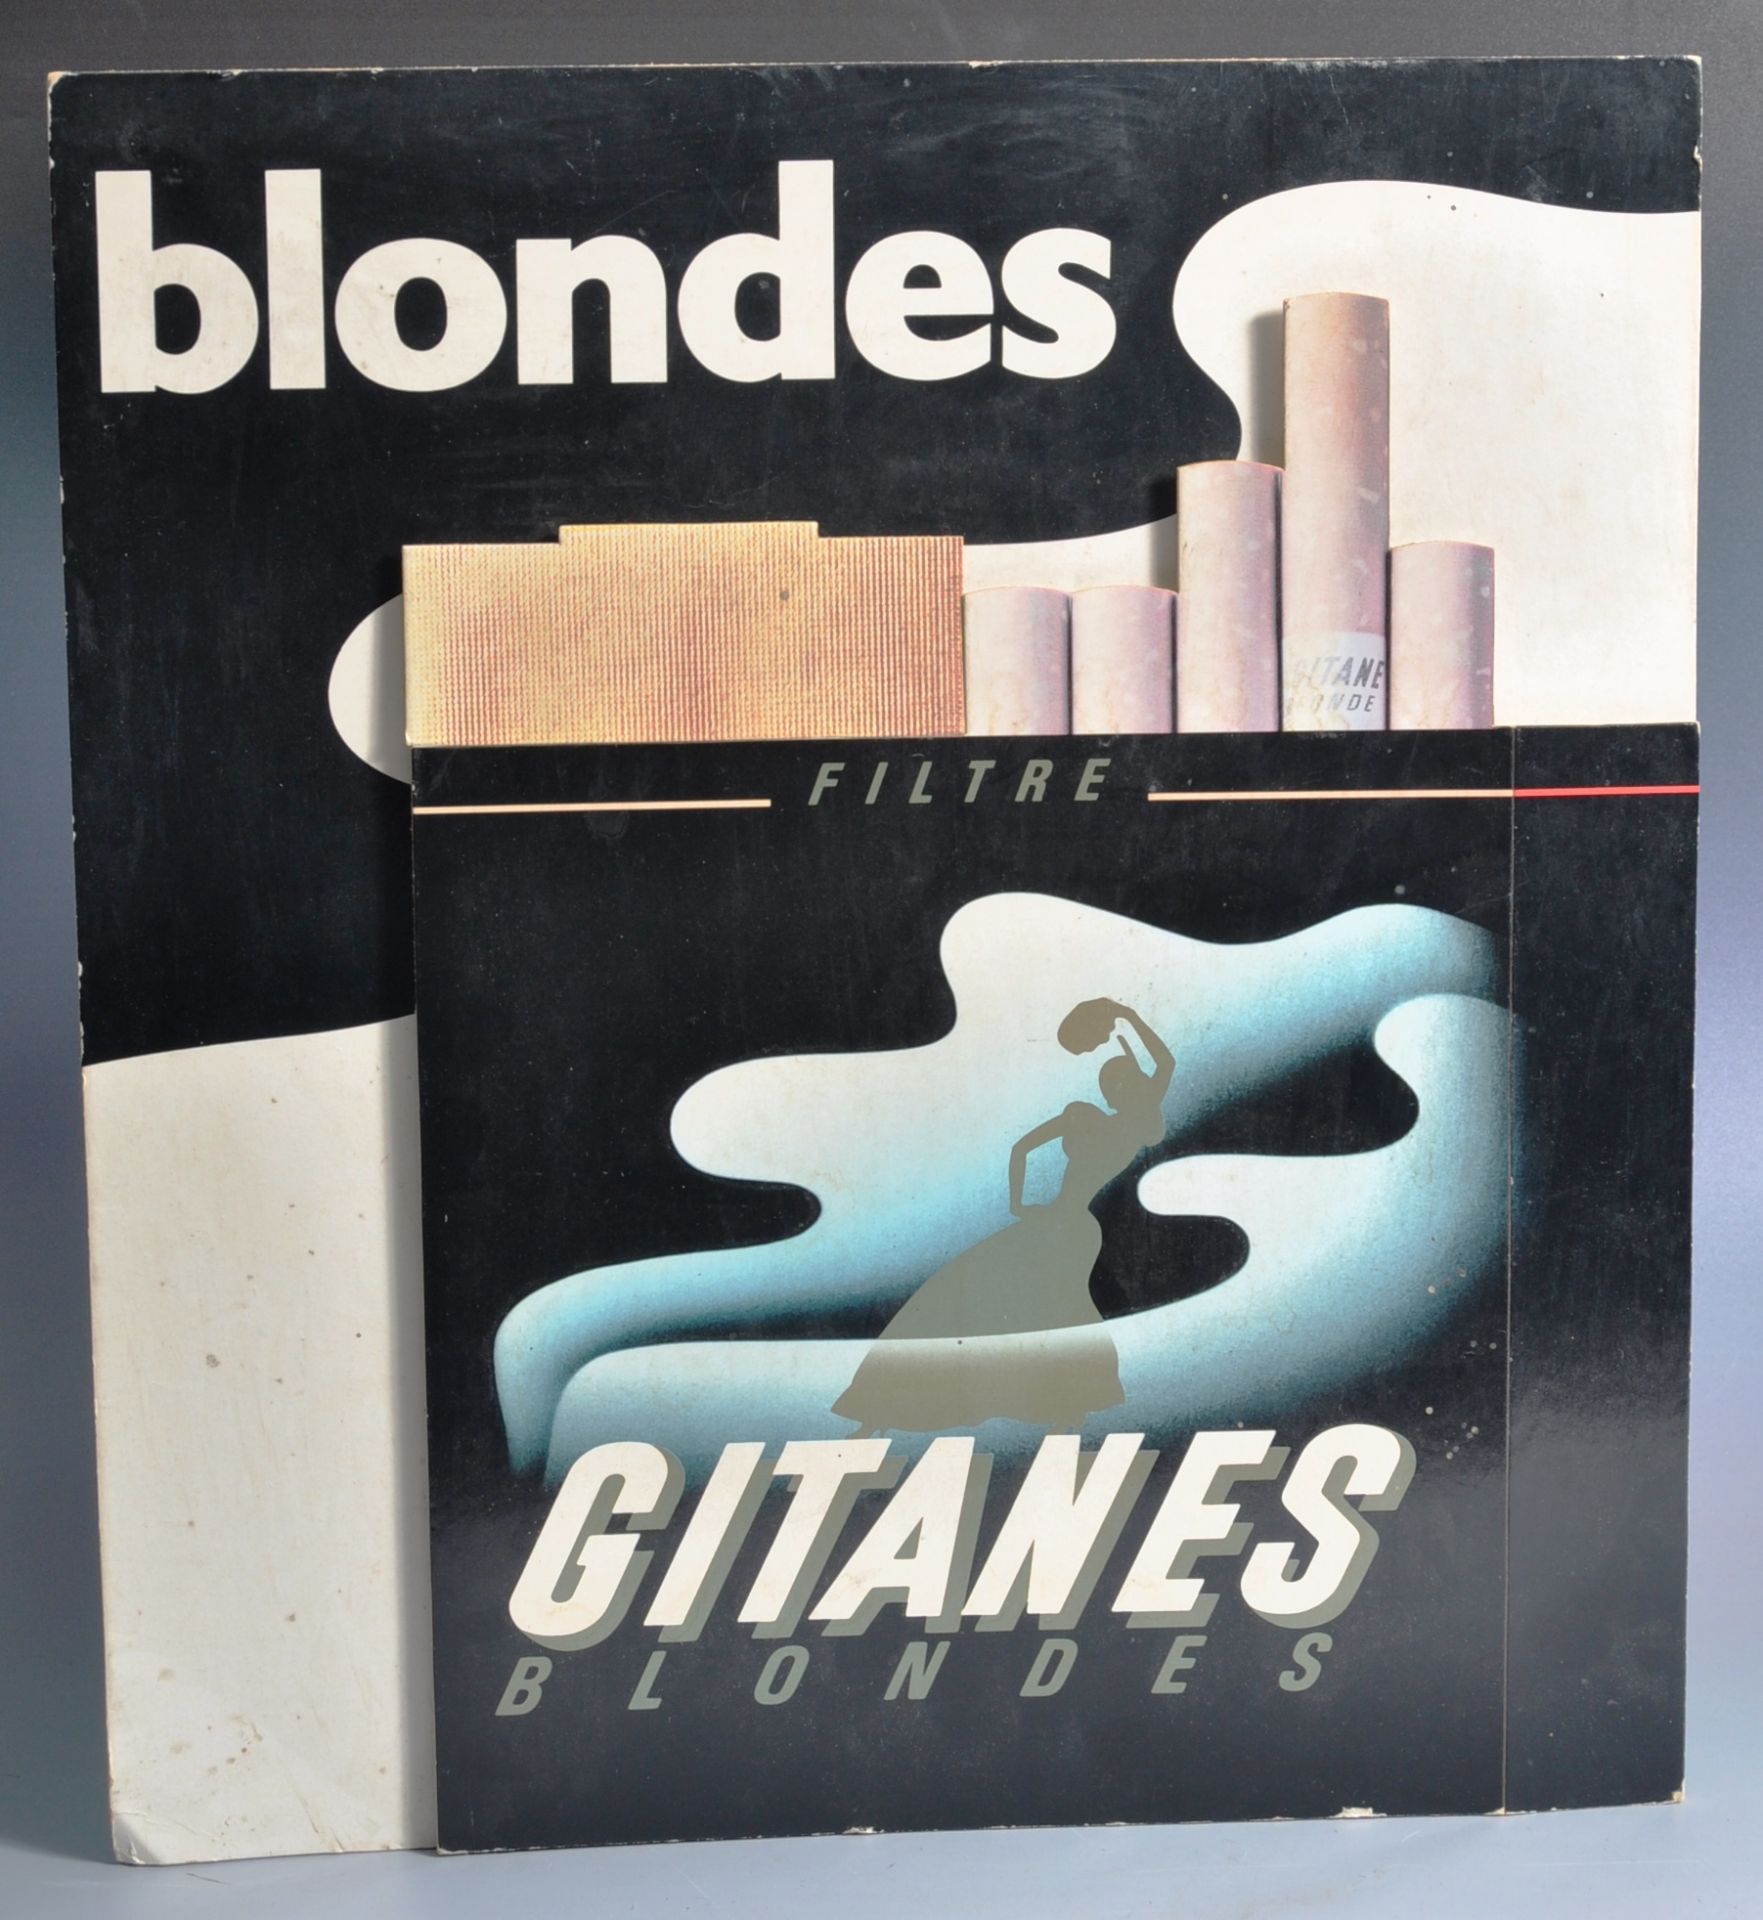 BLONDES - IMPERIAL TOBACCO 1980'S ADVERTISING POINT OF SALE SIGN